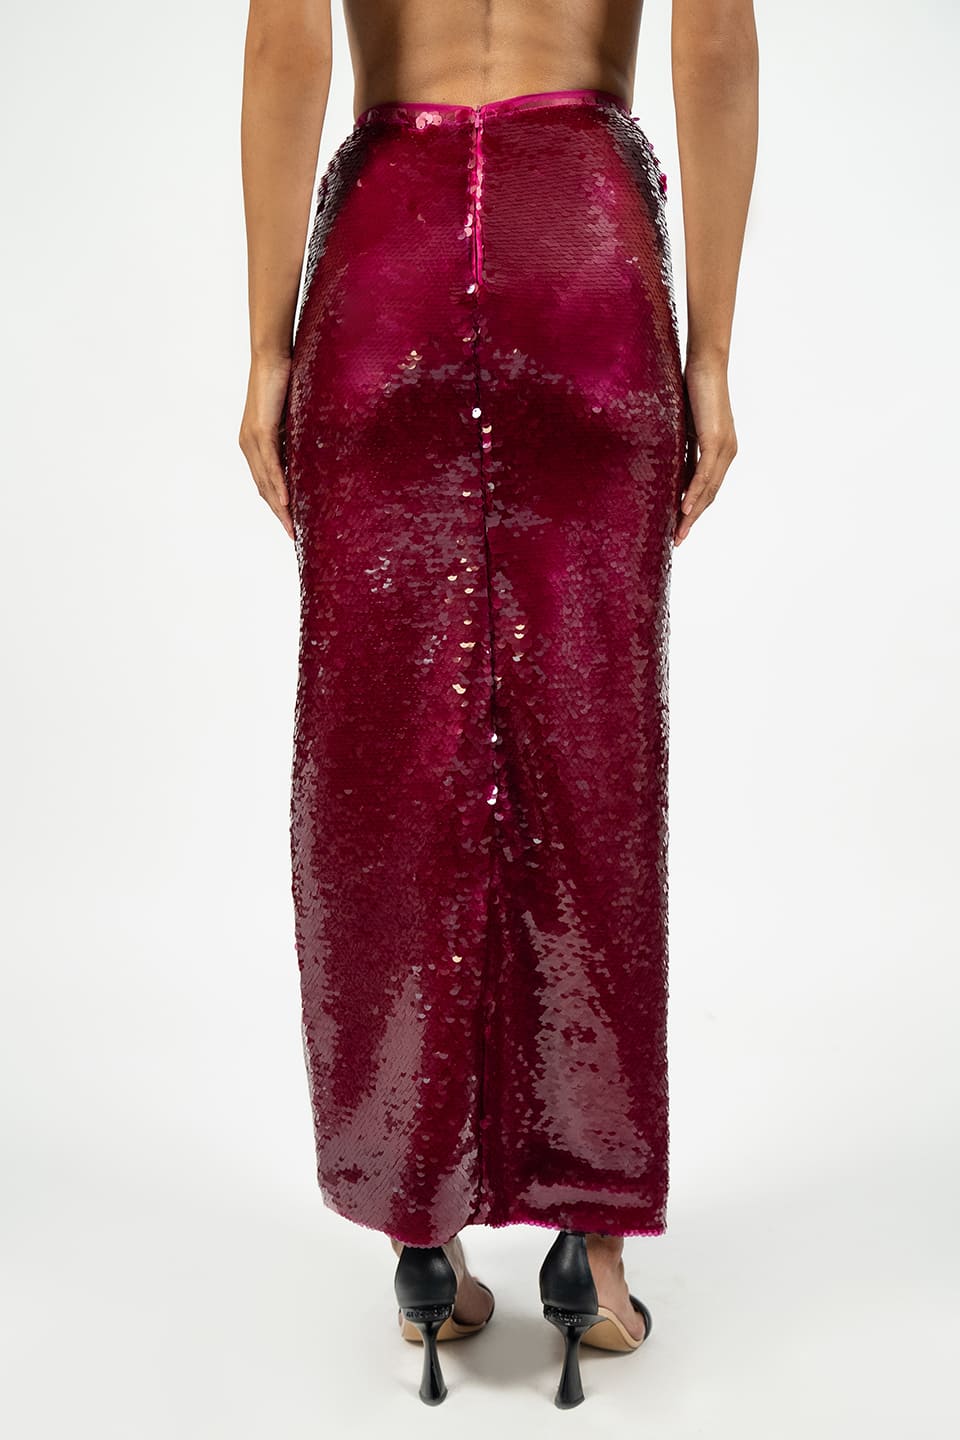 Thumbnail for Product gallery 5, Pink Sequin Midi Skirt